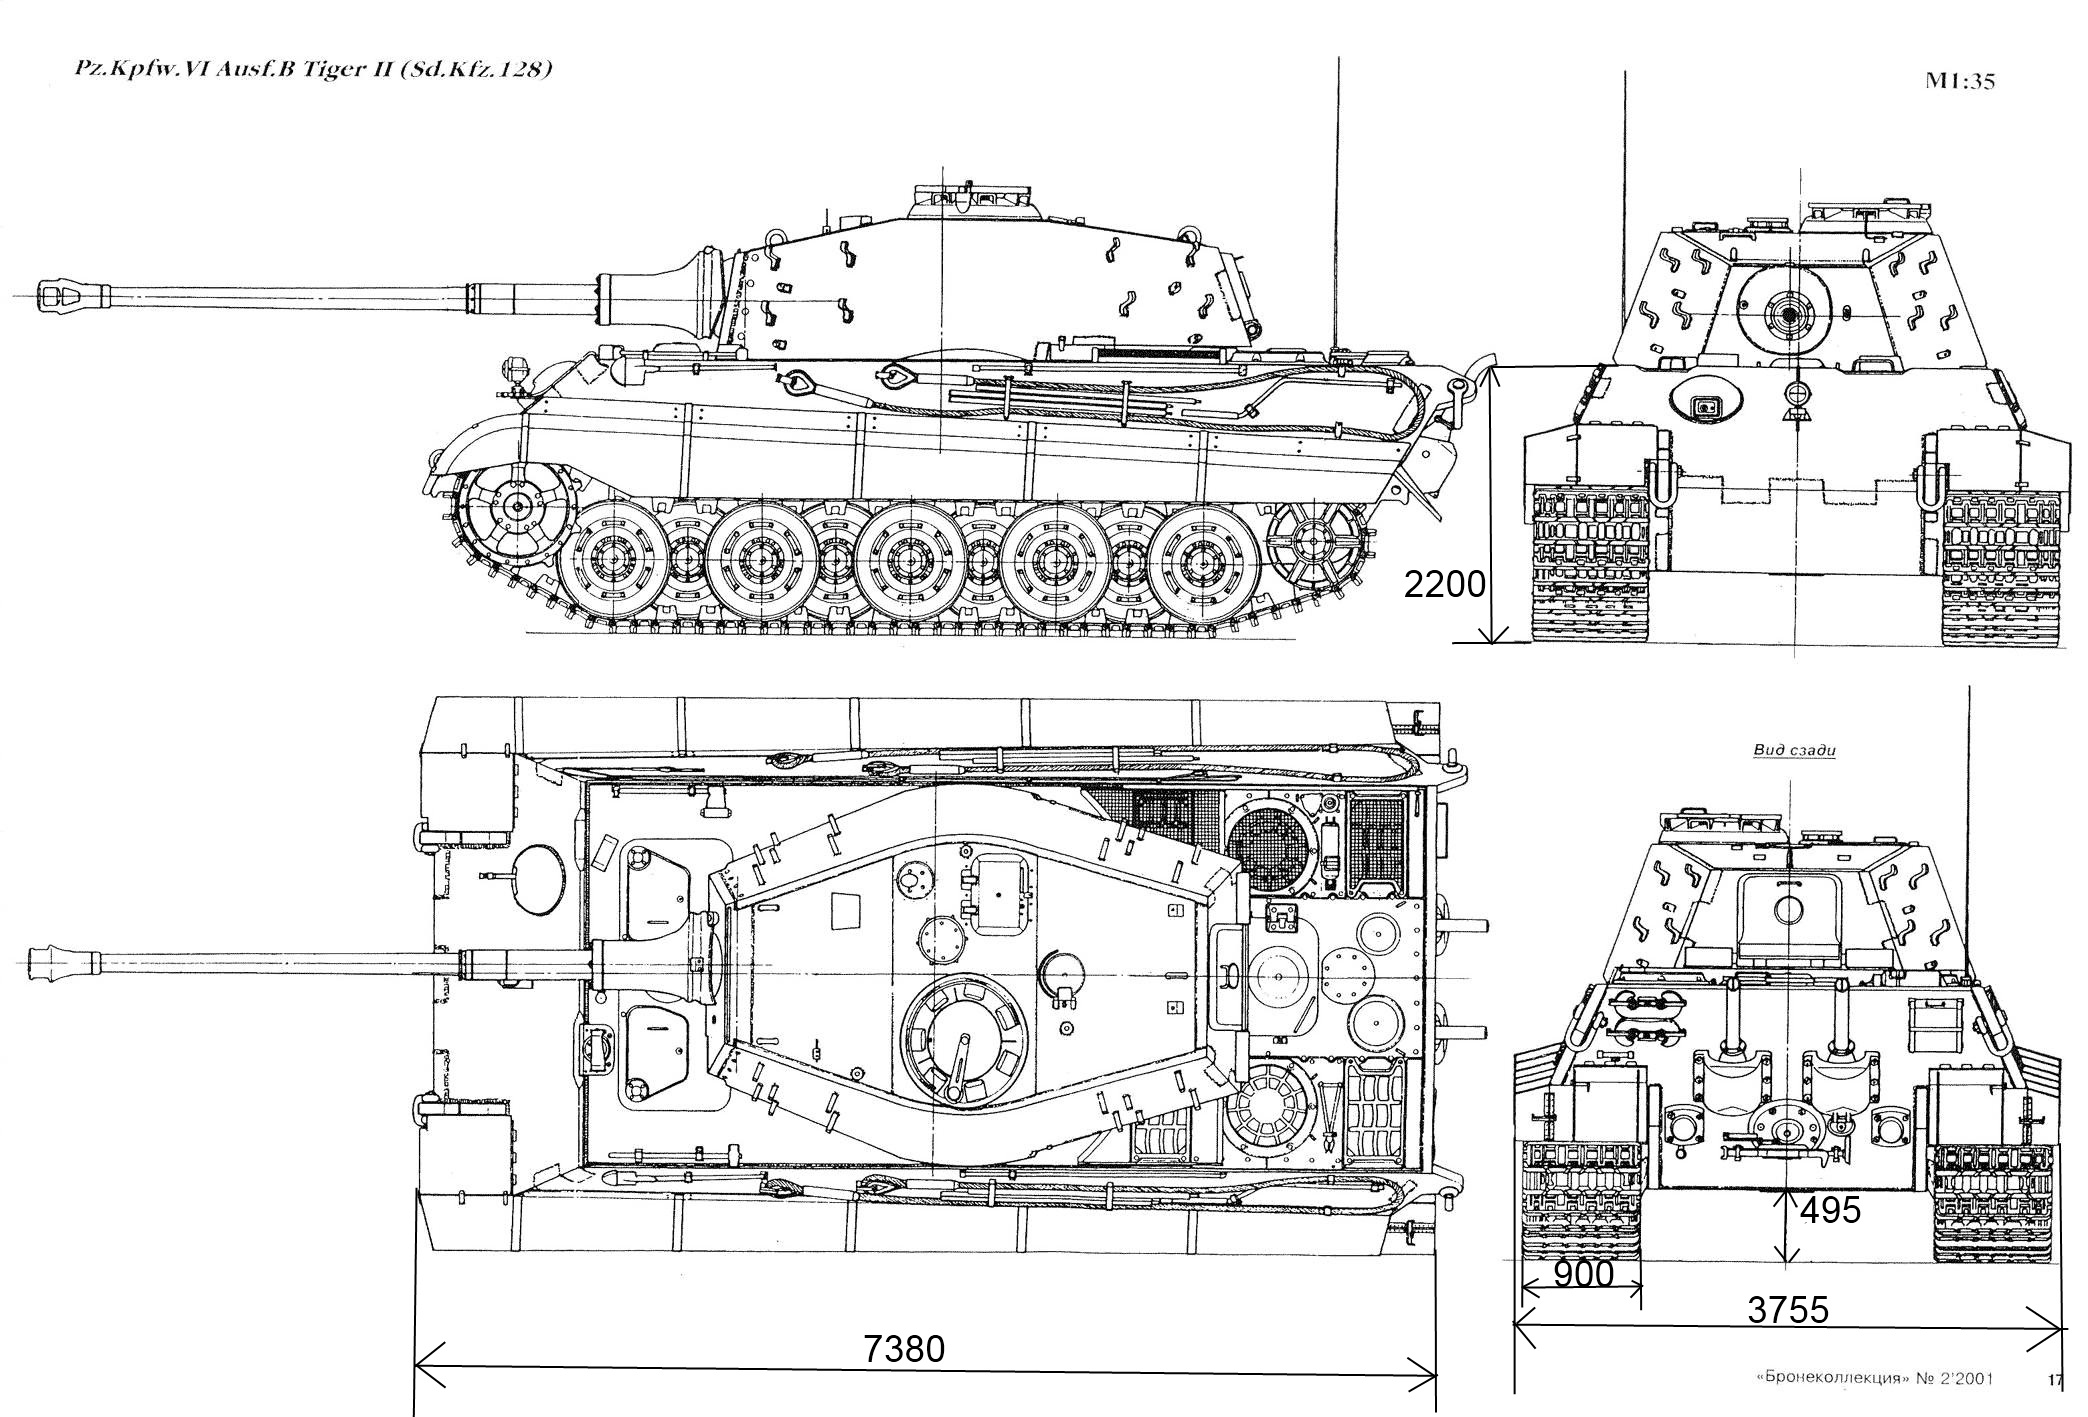 Blueprint of the Tiger II